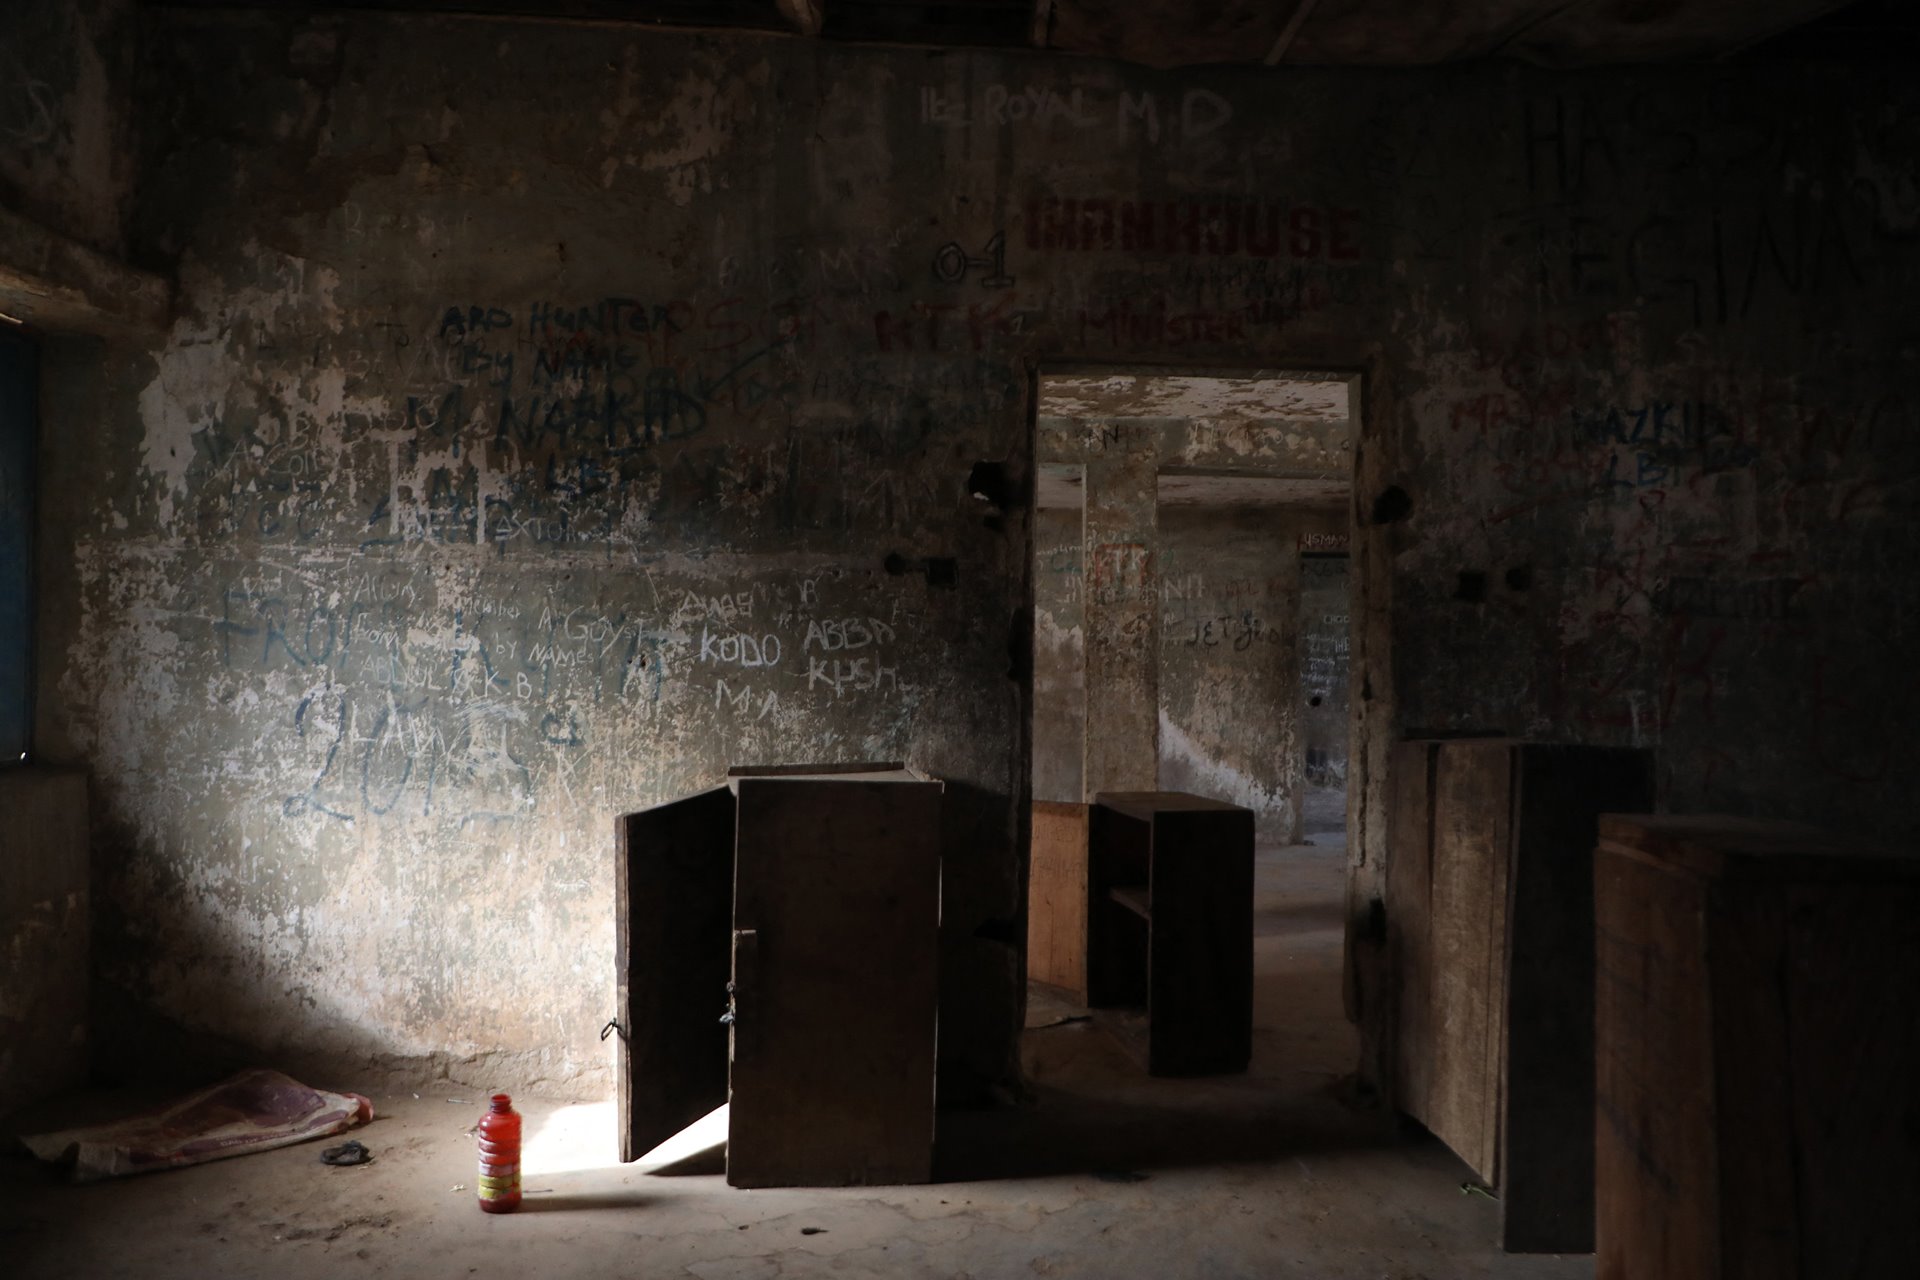 Objects lie abandoned after a kidnapping at the Government Secondary Science School, Kagara, Nigeria, on 18 February 2021. The day before, gunmen had abducted an estimated 27 students. One male student was killed during the raid.